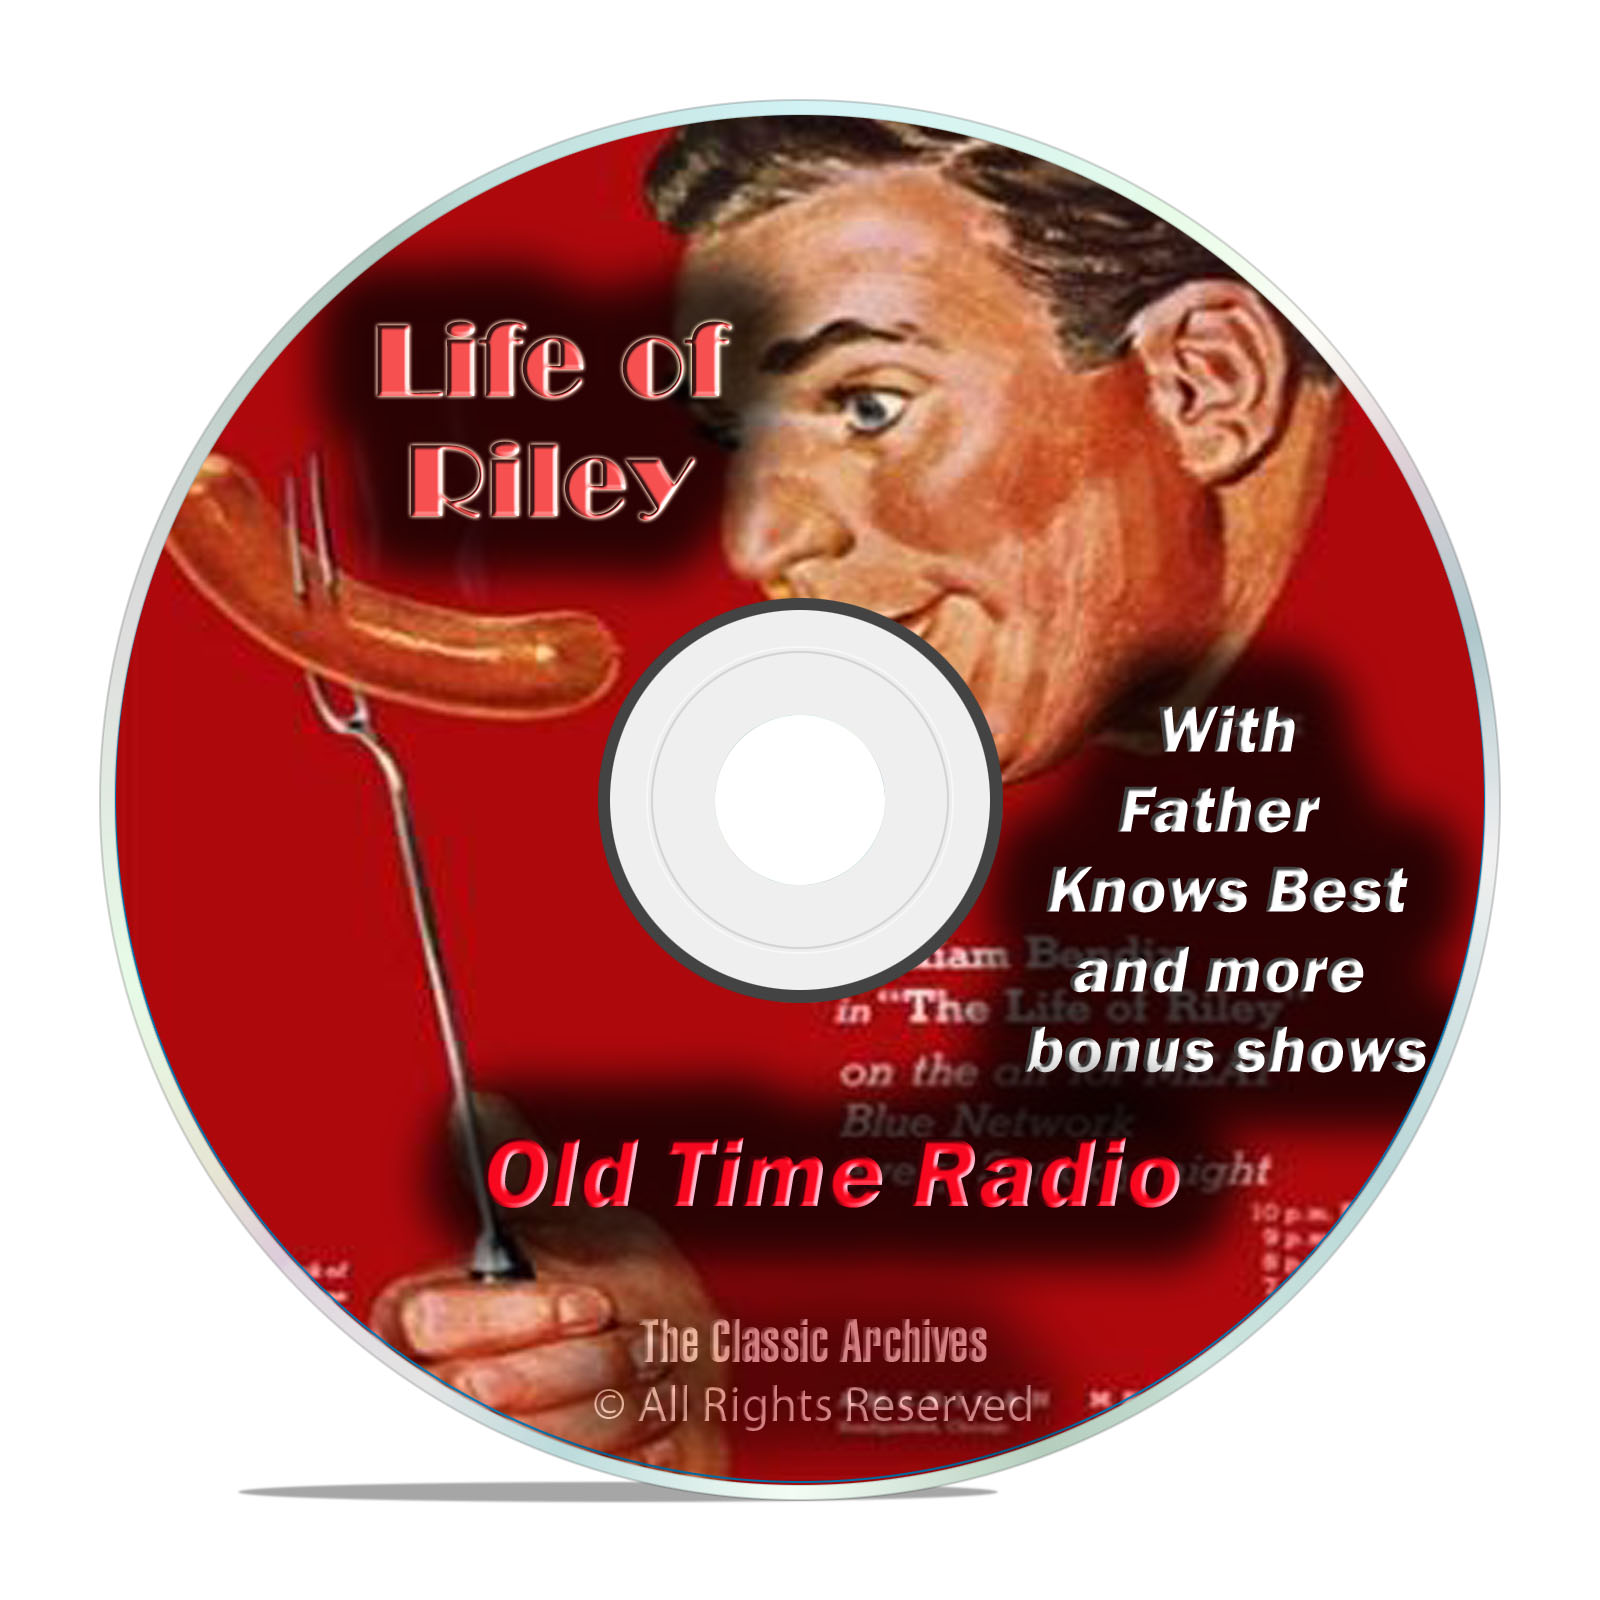 The Life of Riley, Father Knows Best, 607 EPISODES, Old Time Radio, DVD